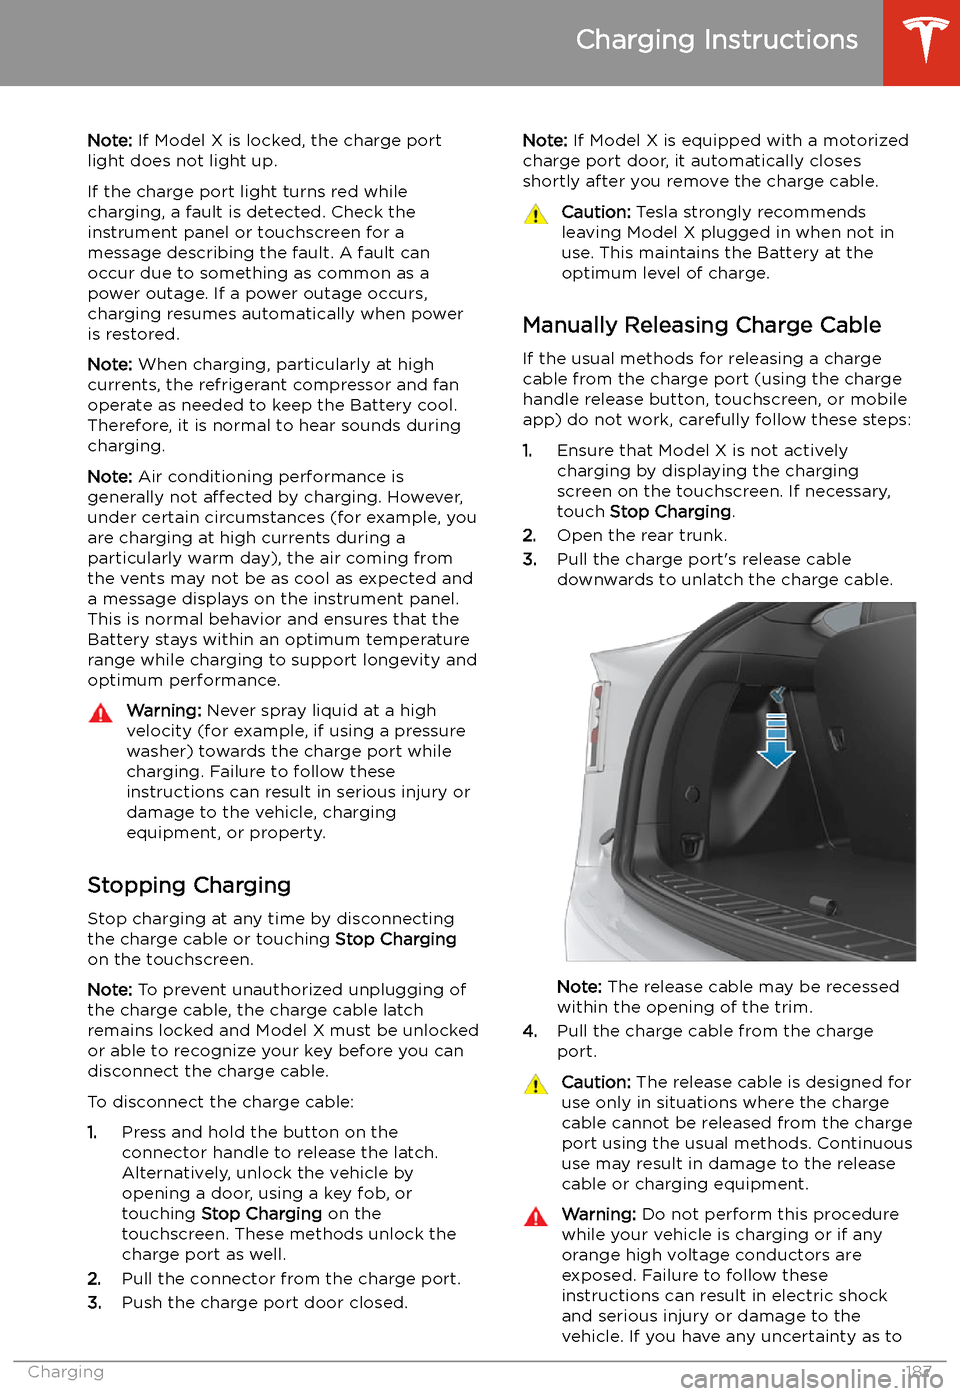 TESLA MODEL X 2020  Owners Manual Note: If Model X is locked, the charge port
light does not light up.
If the charge port light turns red while
charging, a fault is detected. Check the instrument panel or touchscreen for a
message des